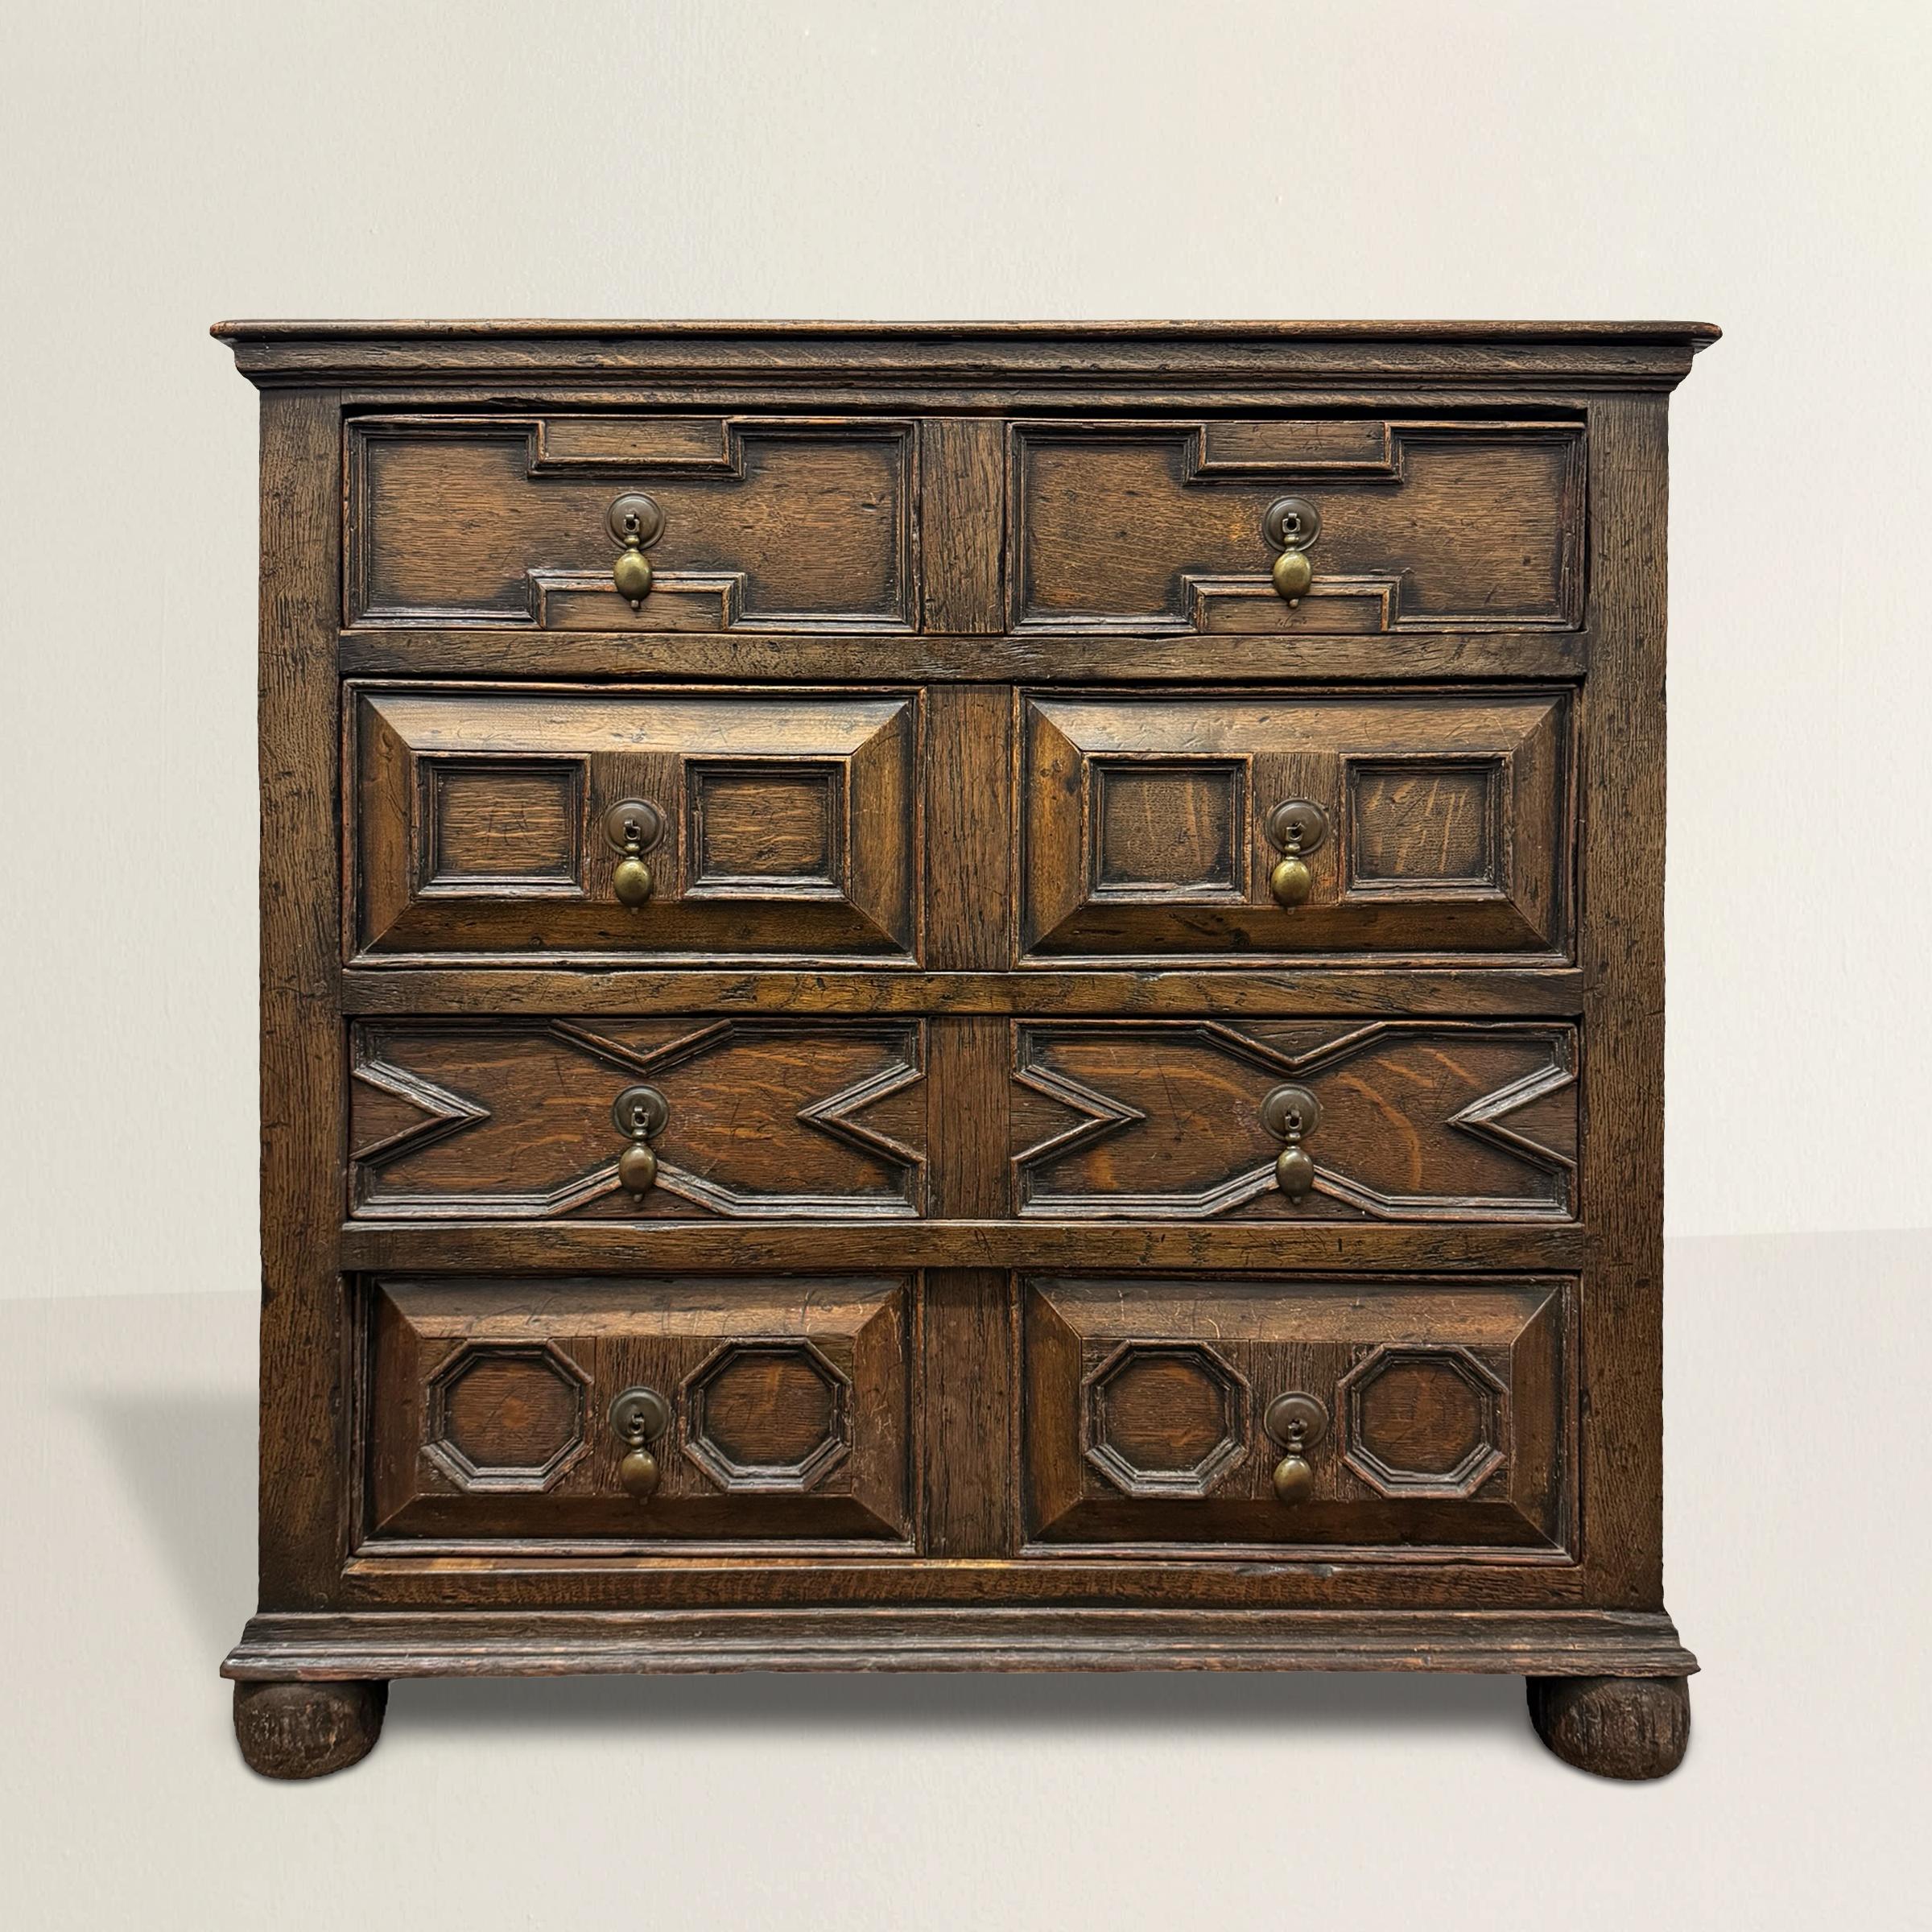 This 19th-century English William and Mary-style oak chest of drawers seamlessly marries functionality with elegance, boasting a hidden surprise within its classic design. The top drawer conceals a secret fold-out desk, offering a discreet workspace